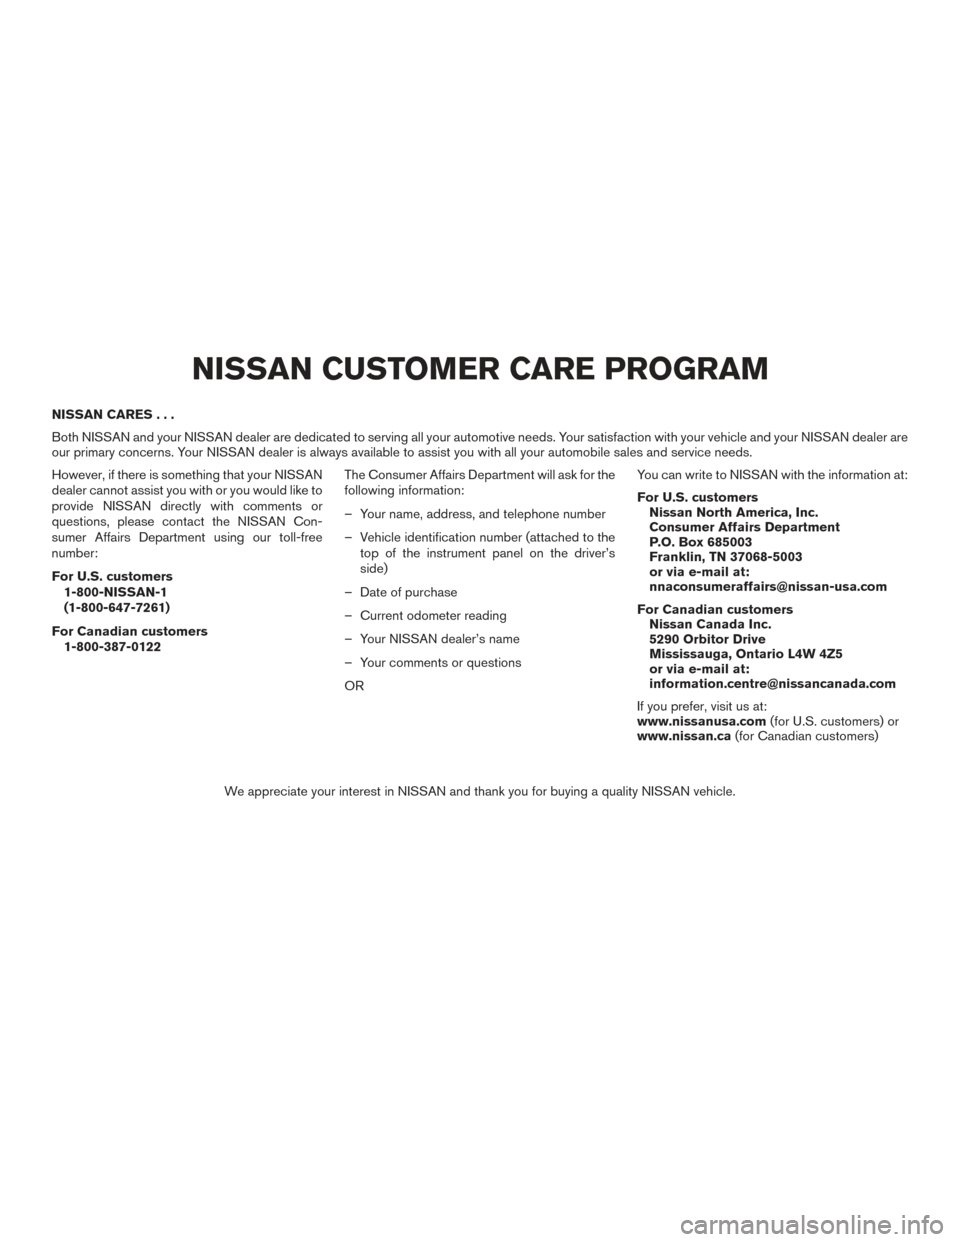 NISSAN MURANO 2017 3.G Owners Manual NISSAN CARES...
Both NISSAN and your NISSAN dealer are dedicated to serving all your automotive needs. Your satisfaction with your vehicle and your NISSAN dealer are
our primary concerns. Your NISSAN 